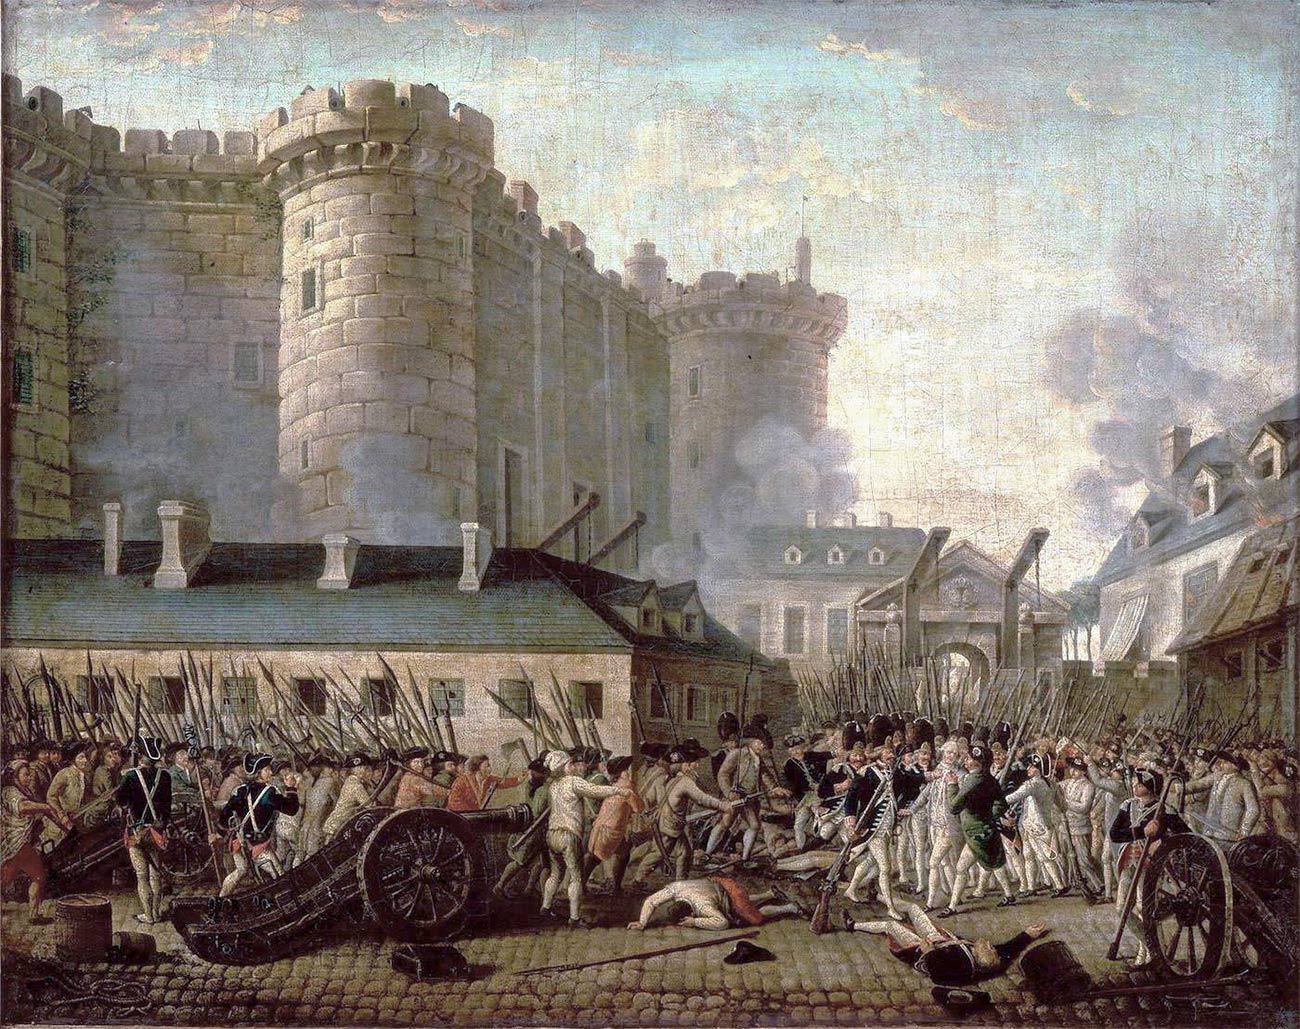 Storming of the Bastille, 14 July 1789